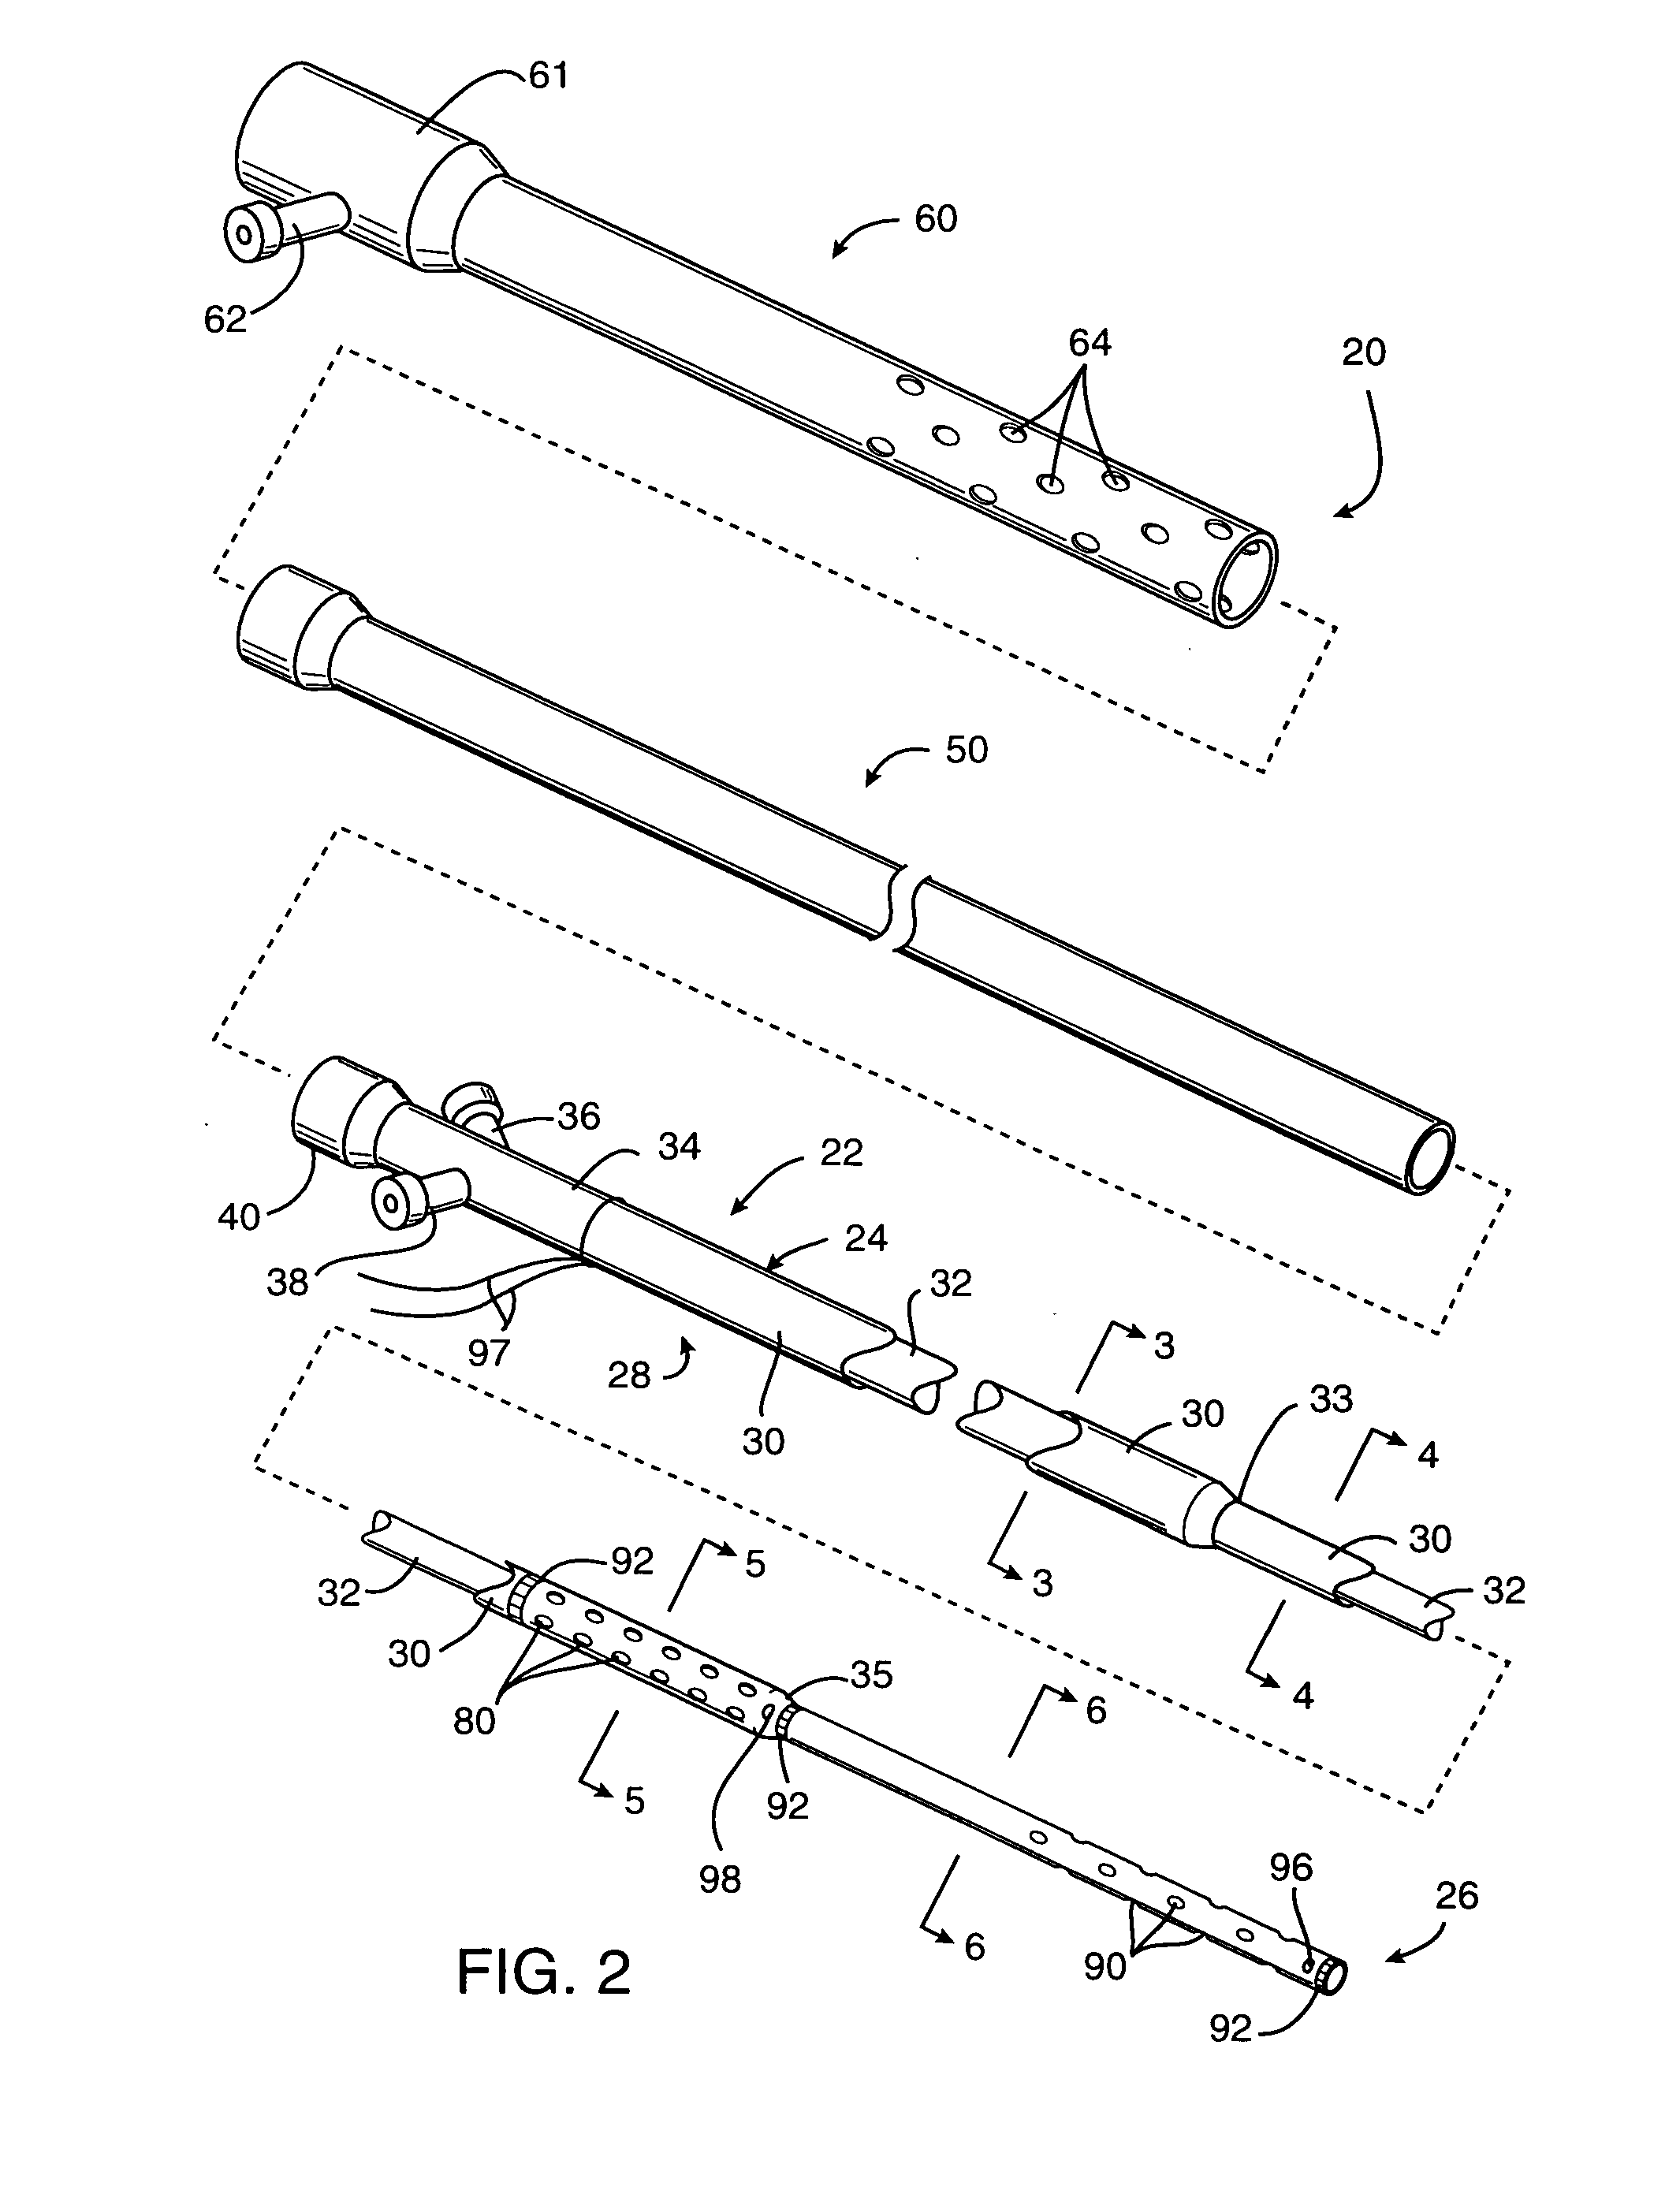 Intravascular device and method of manufacture and use